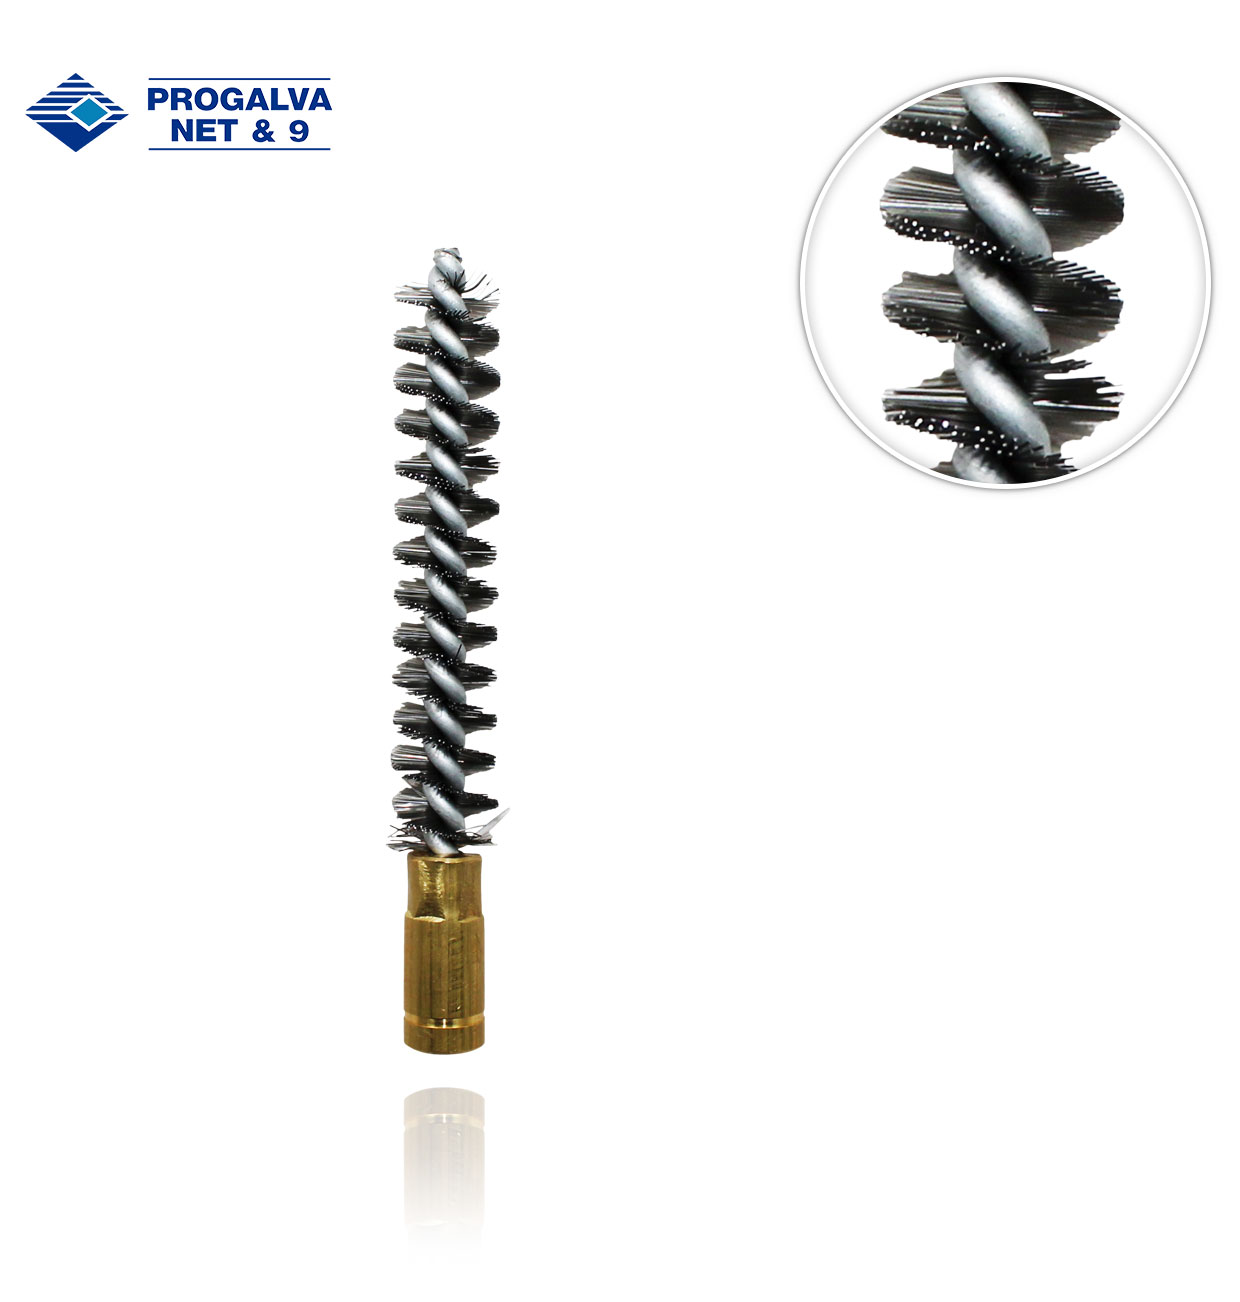 D14mm H8x125 ROUND BRUSH, TEMPERED STEEL WIRE AND GALVANISED CONNECTION TERMINAL.